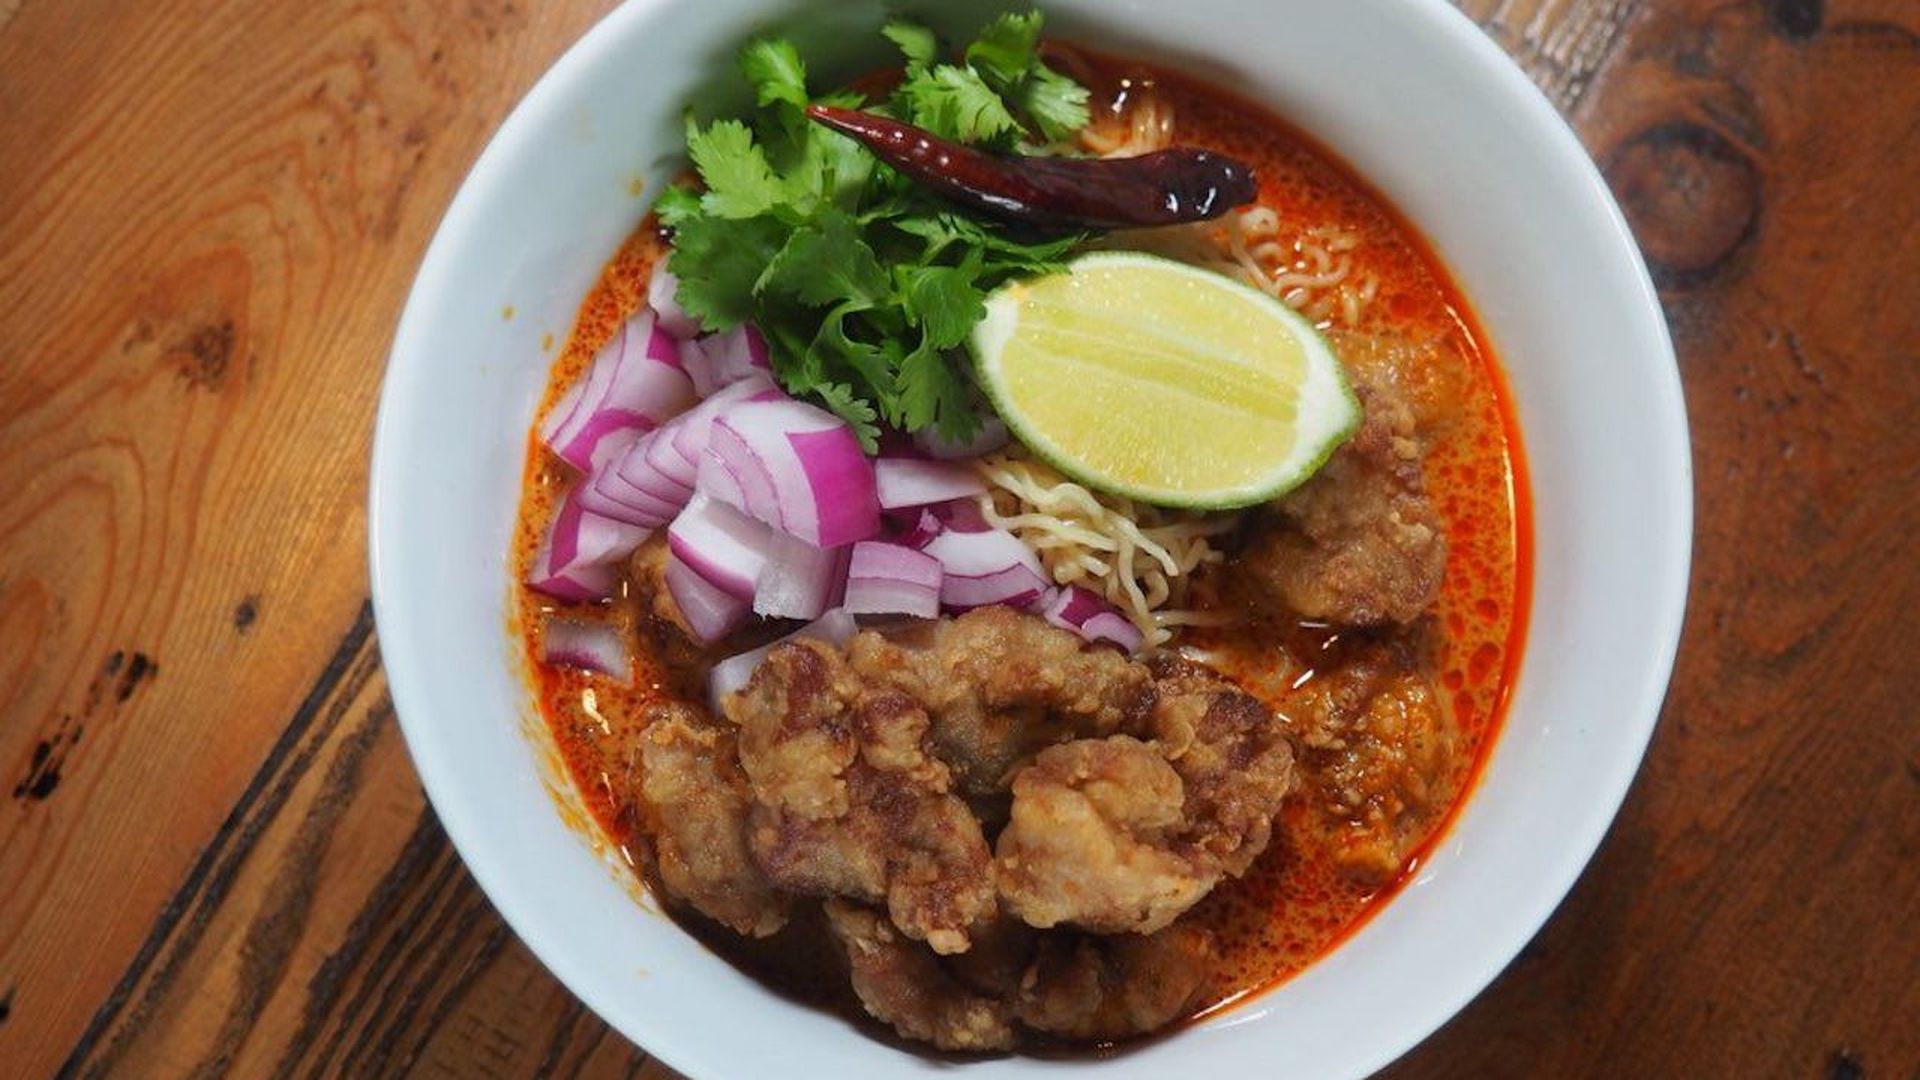 Fried chicken khao soi from the Noodle Lady. Photo via the Noodle Lady